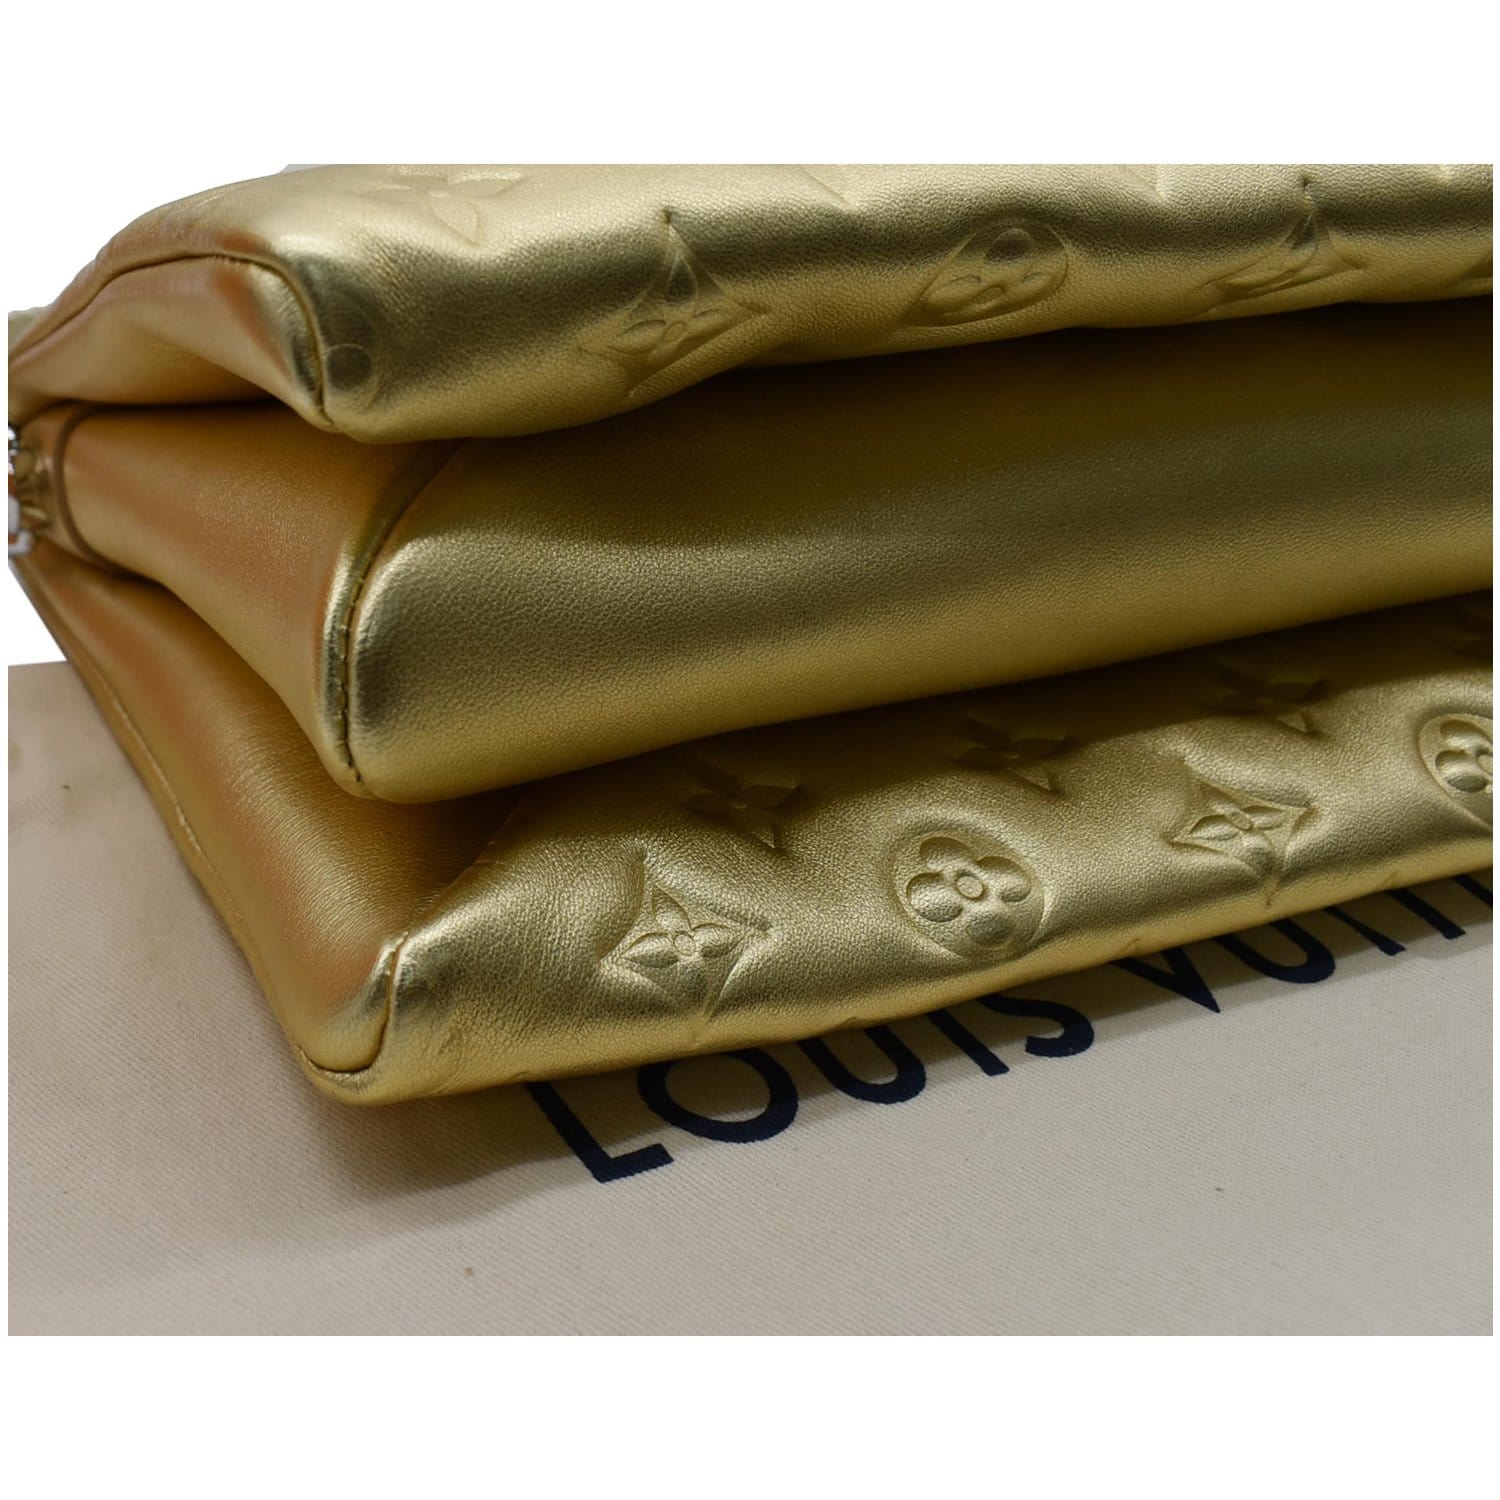 Dragée Monogram Puffy Lambskin Fall In Love Coussin PM Gold Hardware, 2021